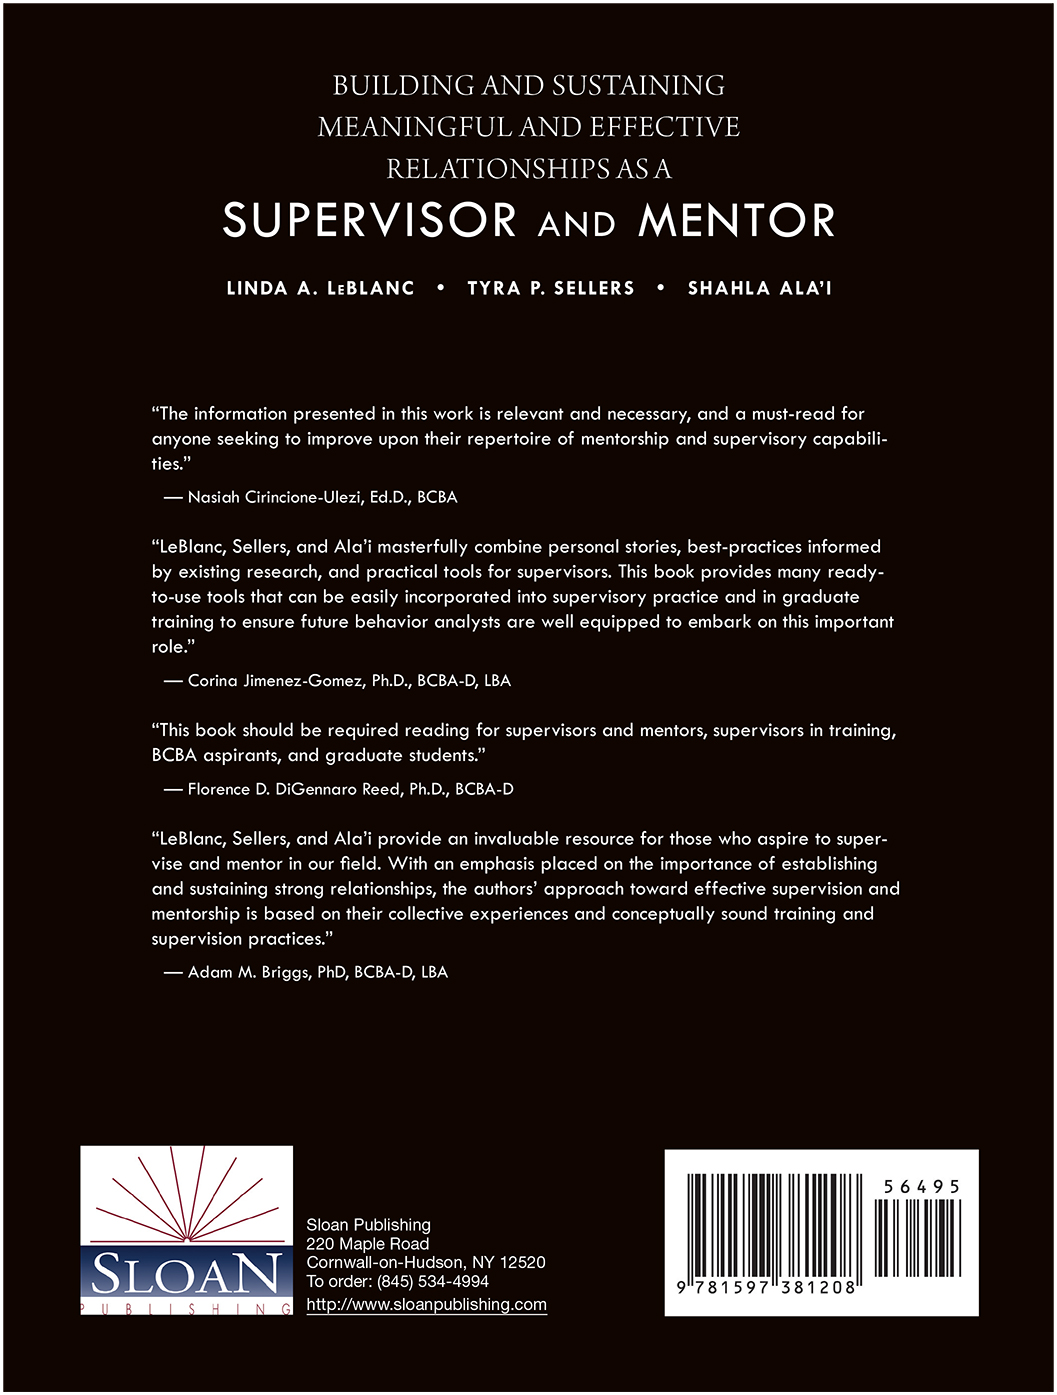 Supervisor and mentor book back cover